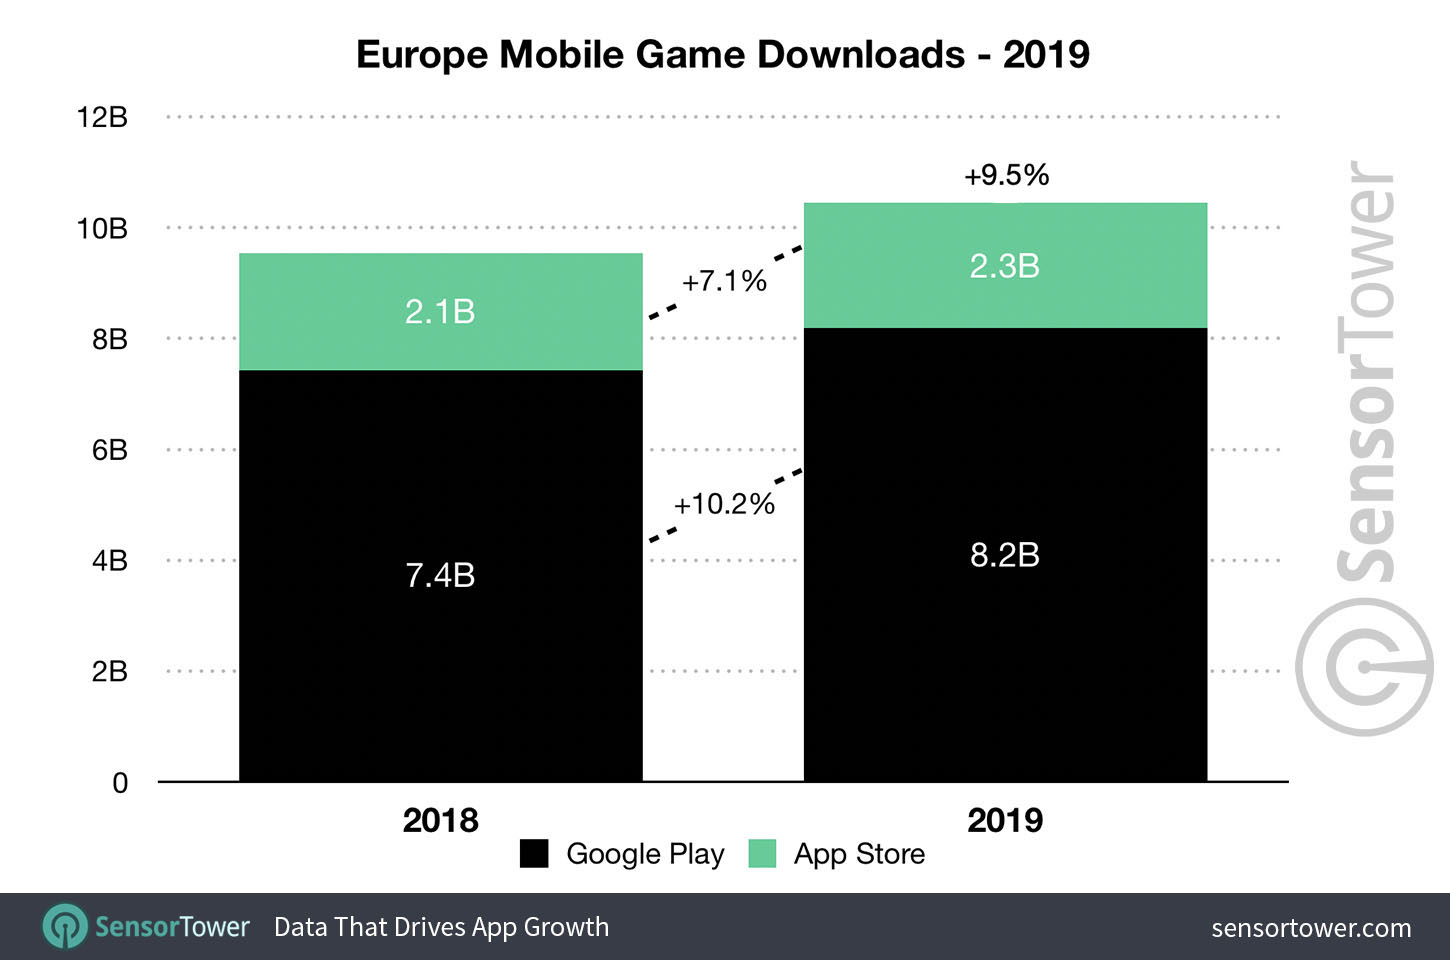 European mobile game downloads for 2019